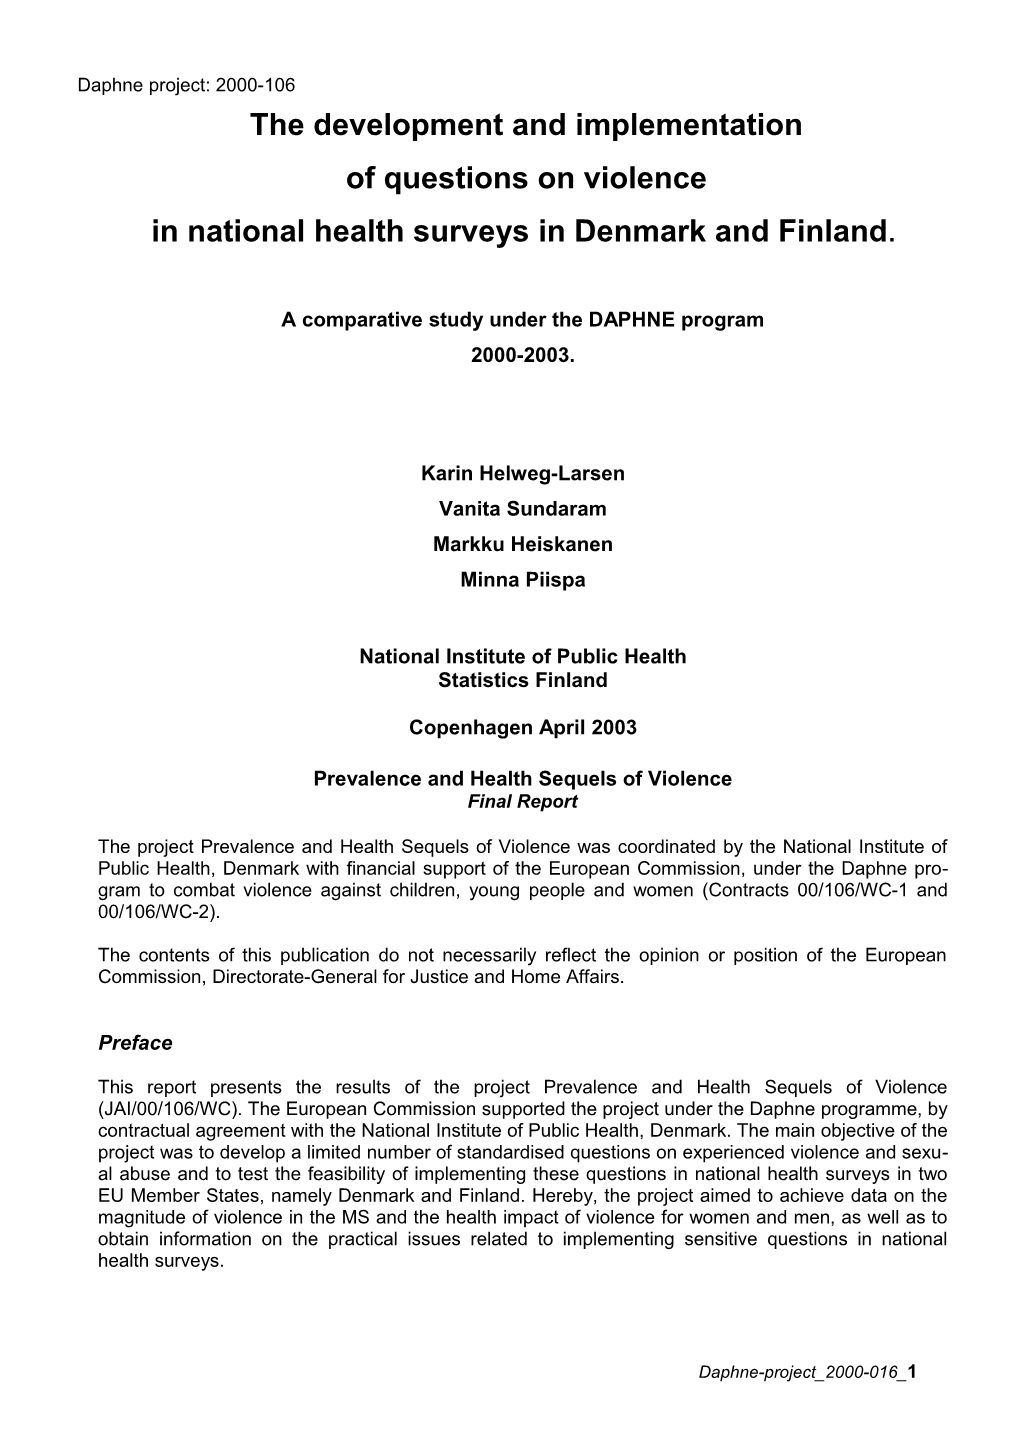 The Development and Implementation of Questions on Violence in National Health Surveys